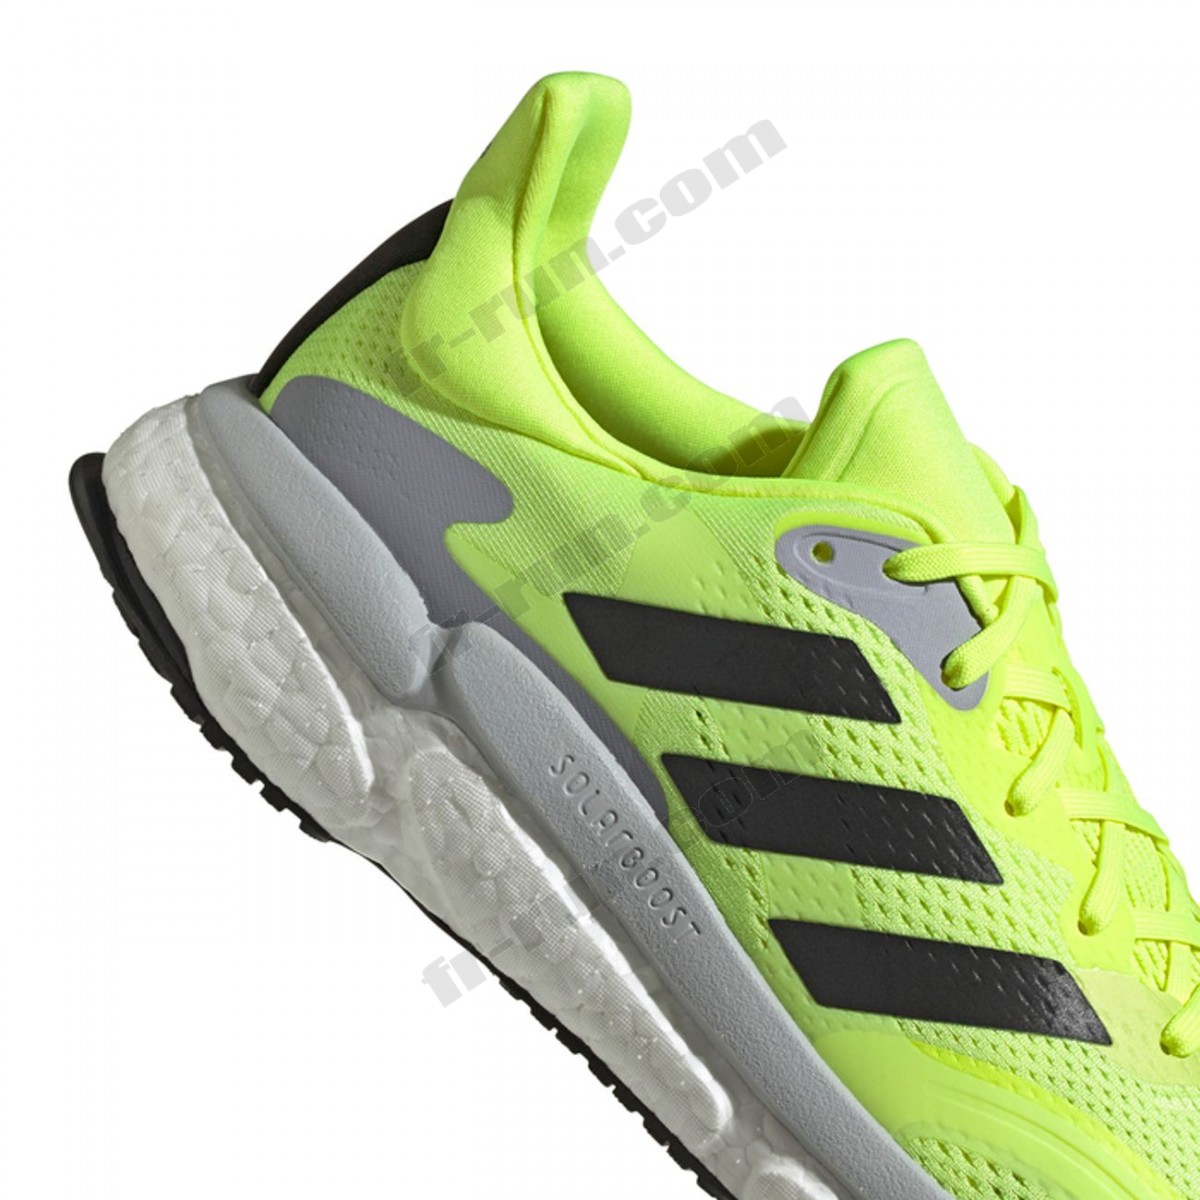 Adidas/CHAUSSURES BASSES running homme ADIDAS SOLAR BOOST 21 M √ Nouveau style √ Soldes - -4